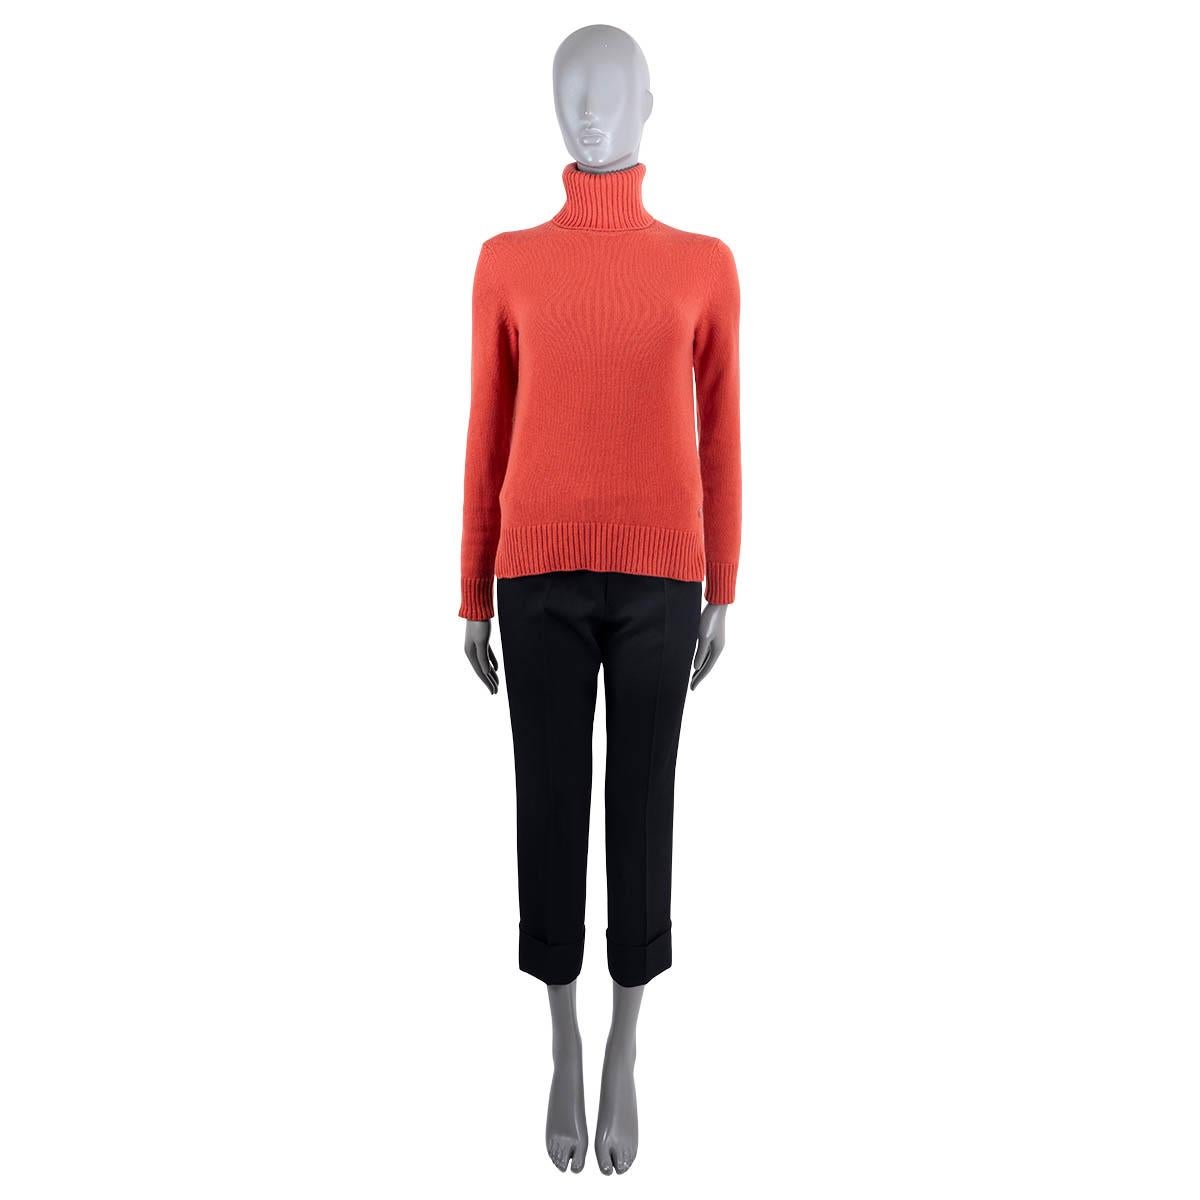 100% authentic Loro Piana Parksville turtleneck sweater in red baby cashmere (100%). Features metal logo detail at the waist, a split hem, rib knit neck, cuffs and hem. Has been worn and is in excellent condition.

Measurements
Tag